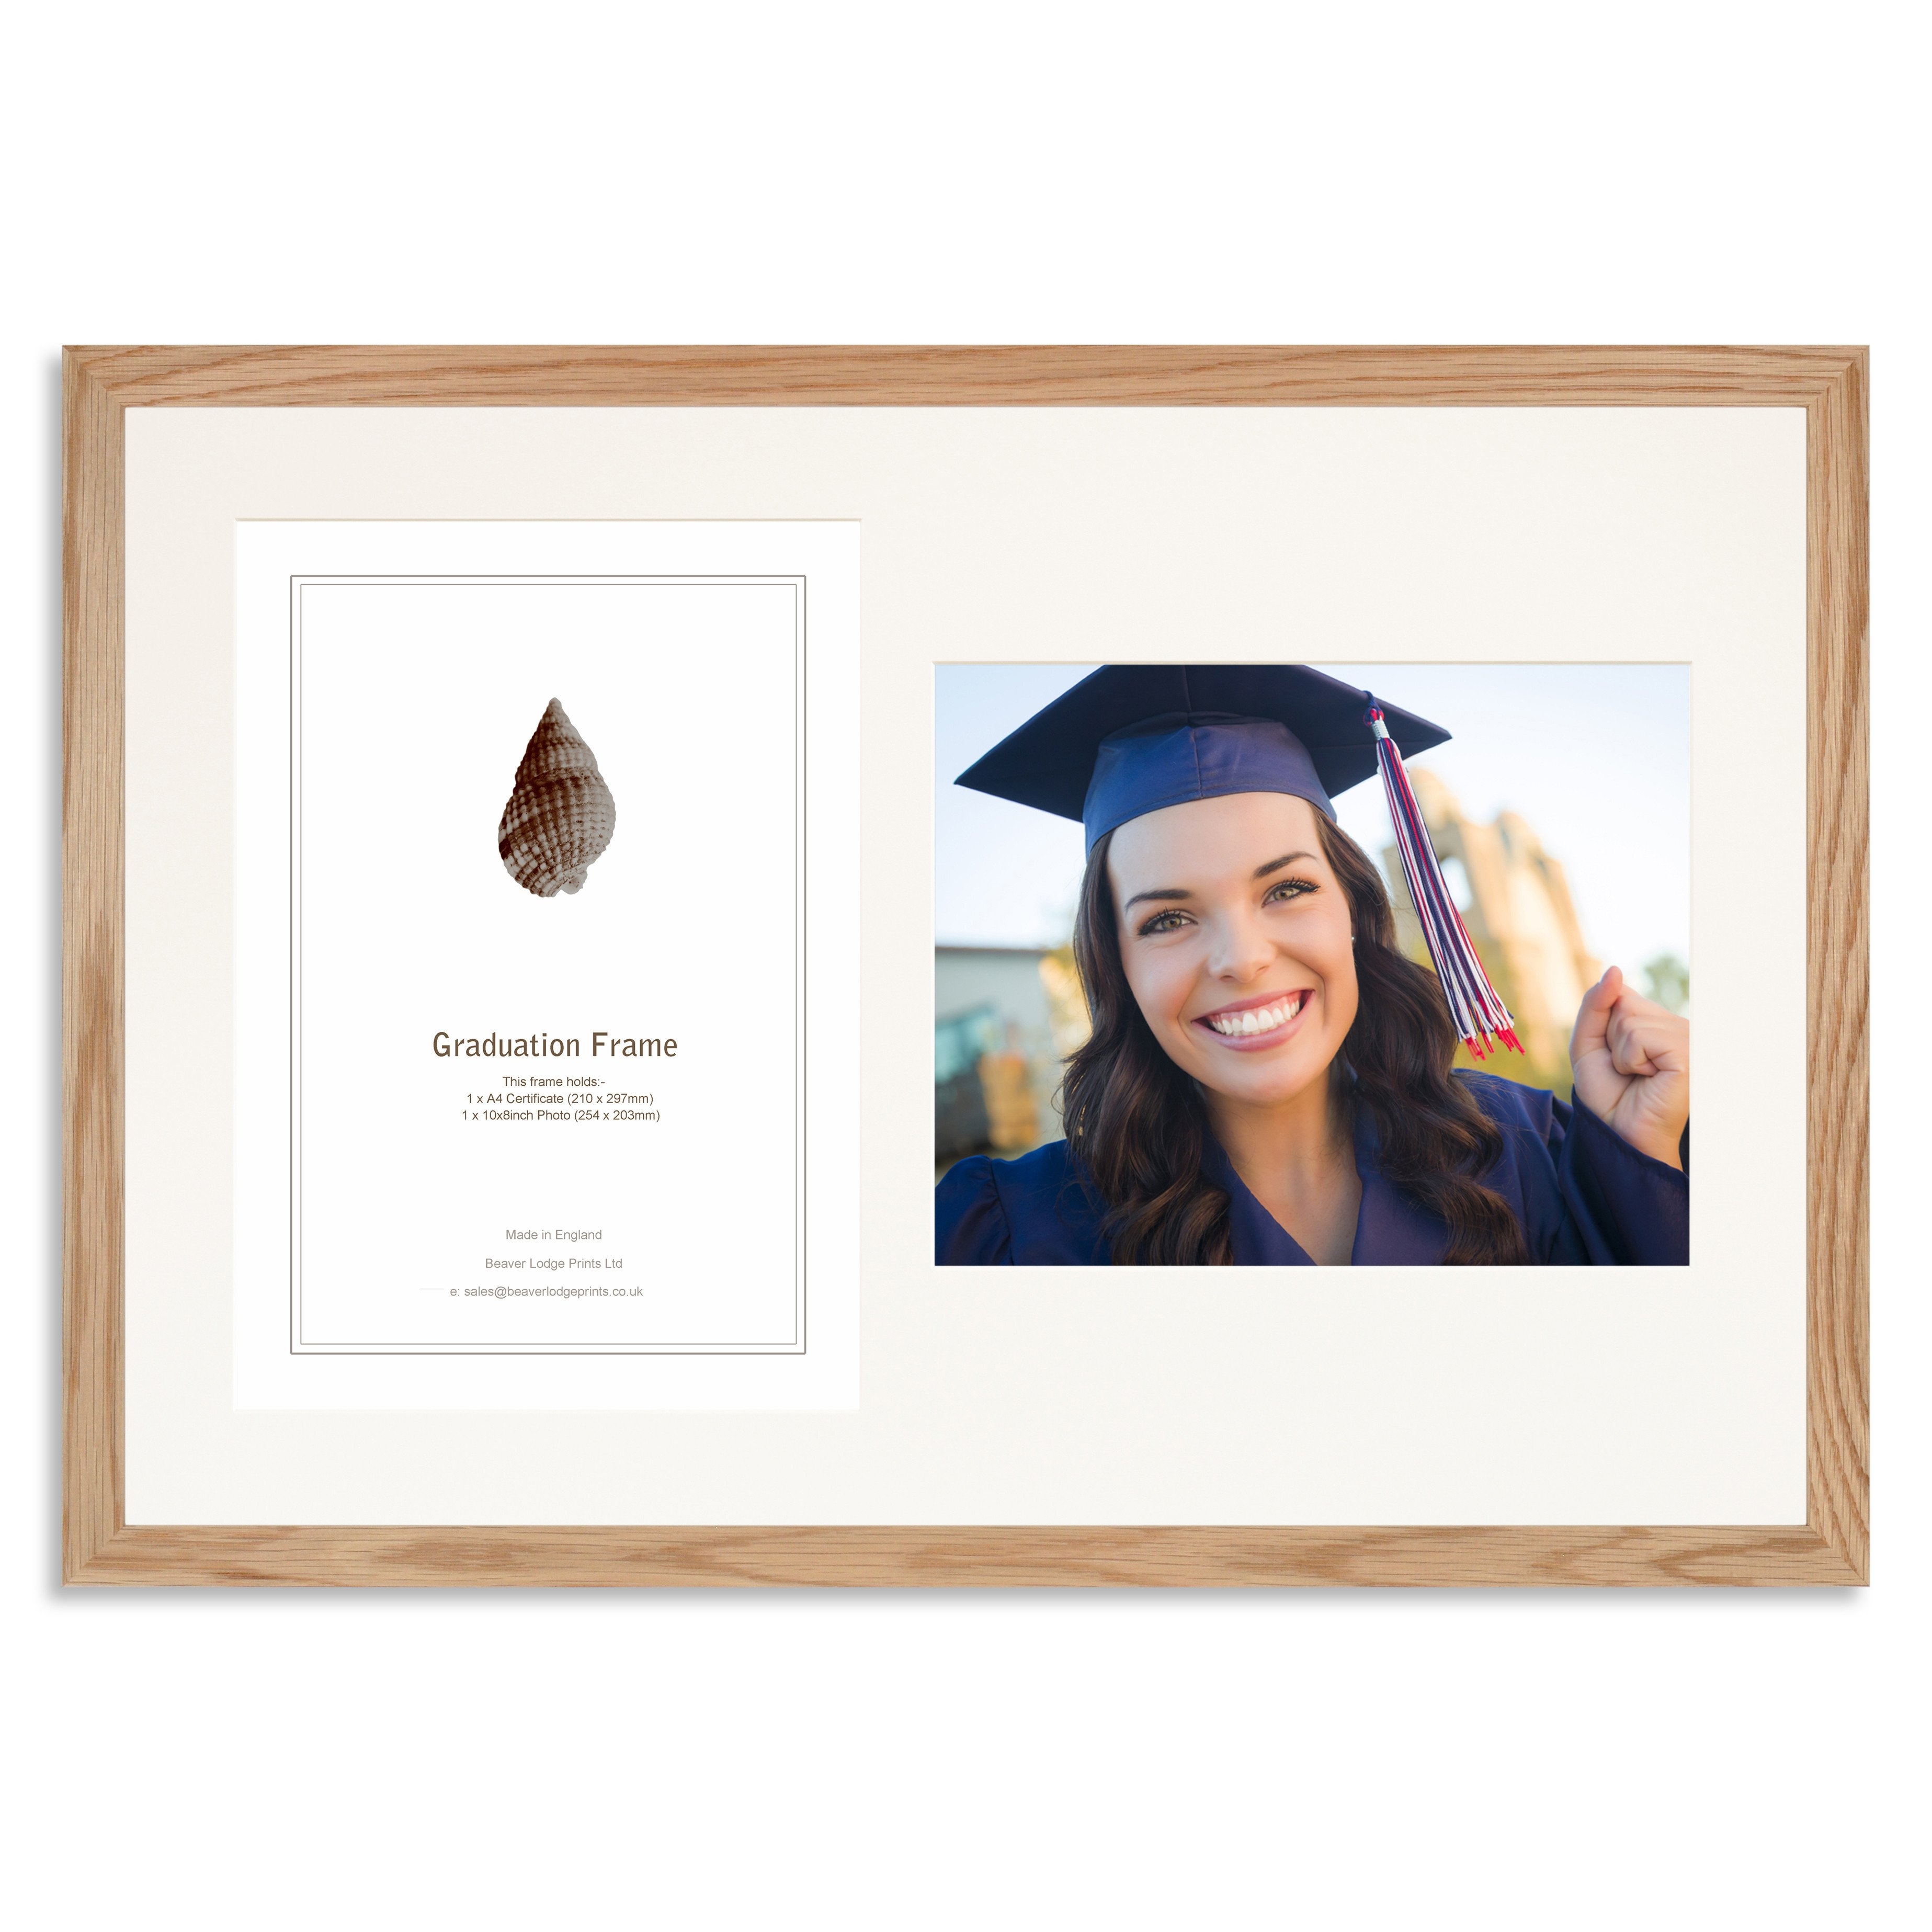 Solid Oak Graduation Frame for A4 Certificate and 10×8/8x10inch Photo